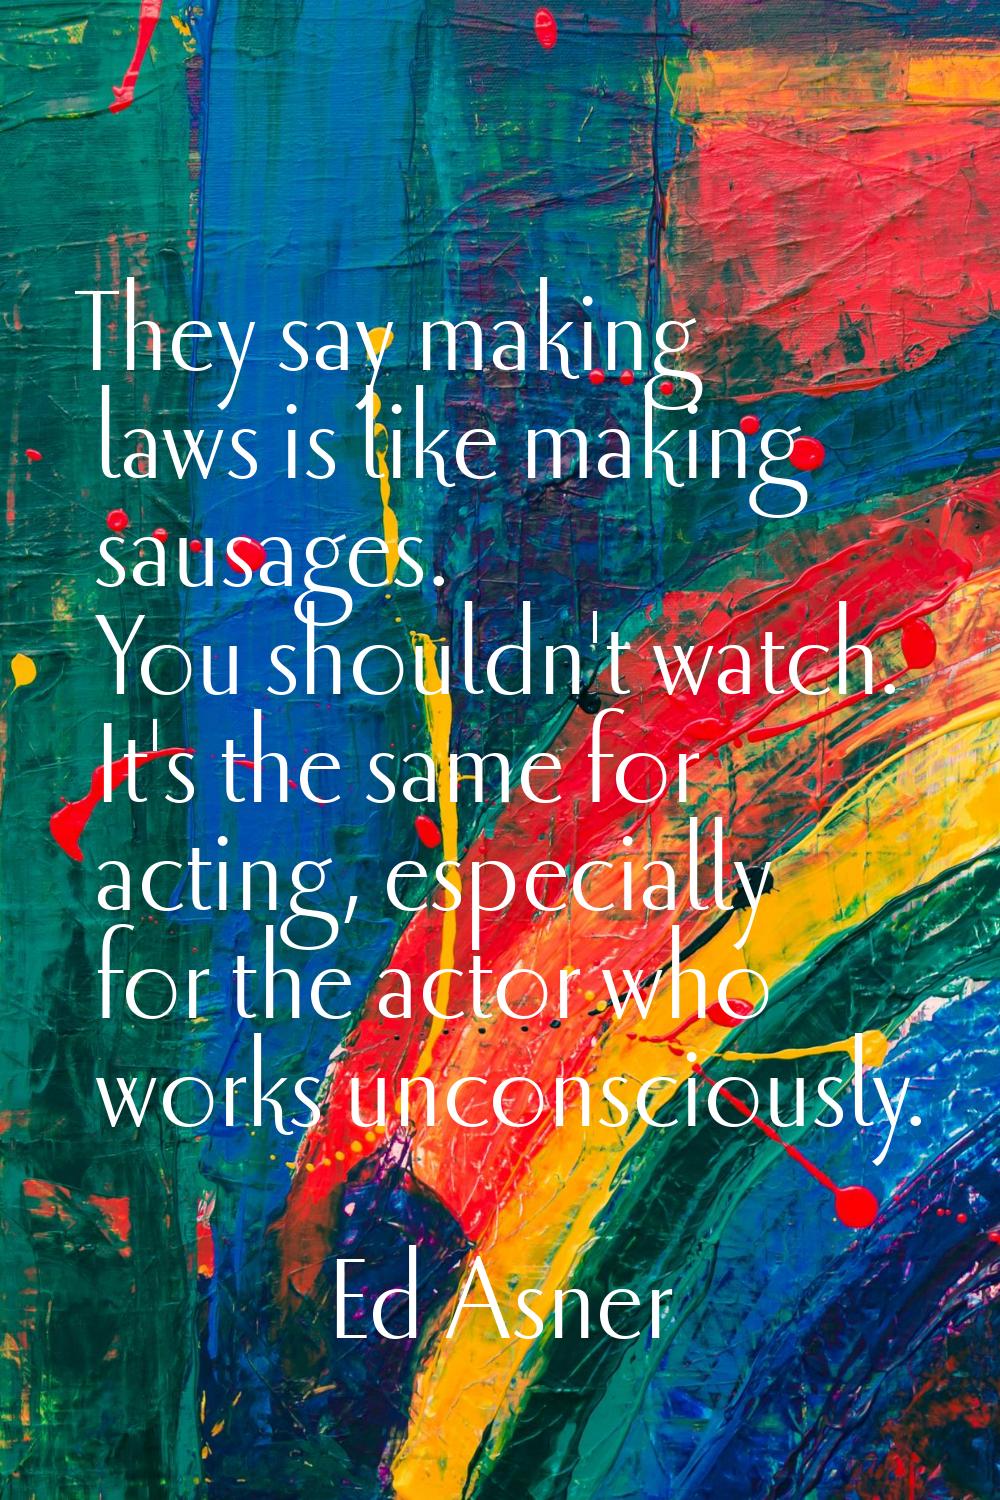 They say making laws is like making sausages. You shouldn't watch. It's the same for acting, especi